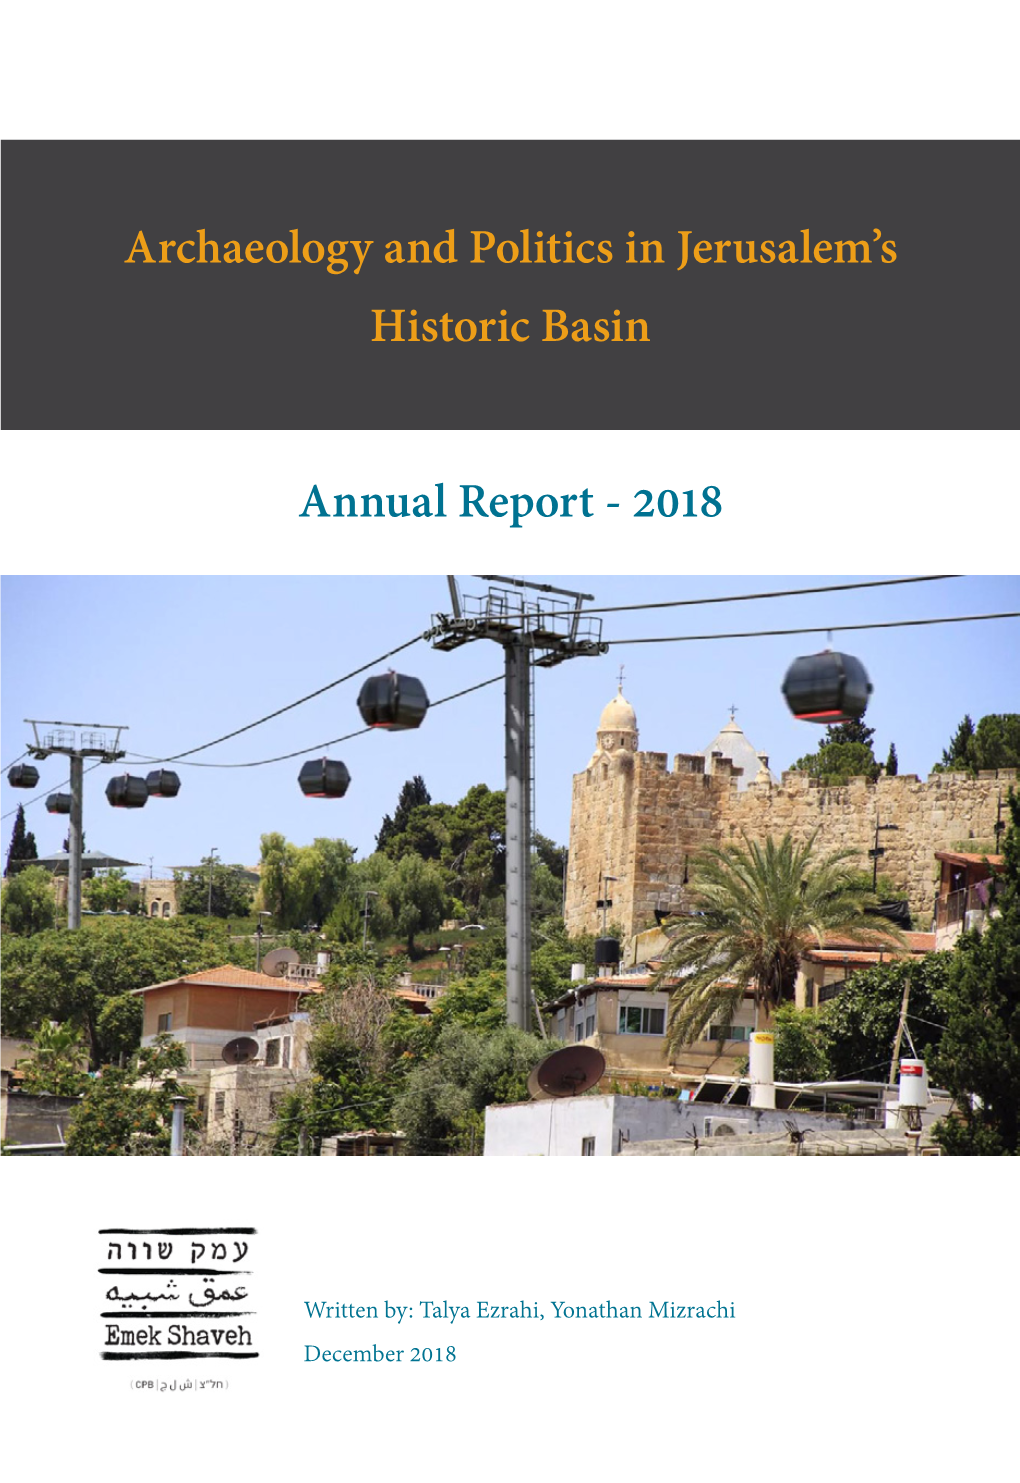 Archaeology and Politics in Jerusalem's Historic Basin Annual